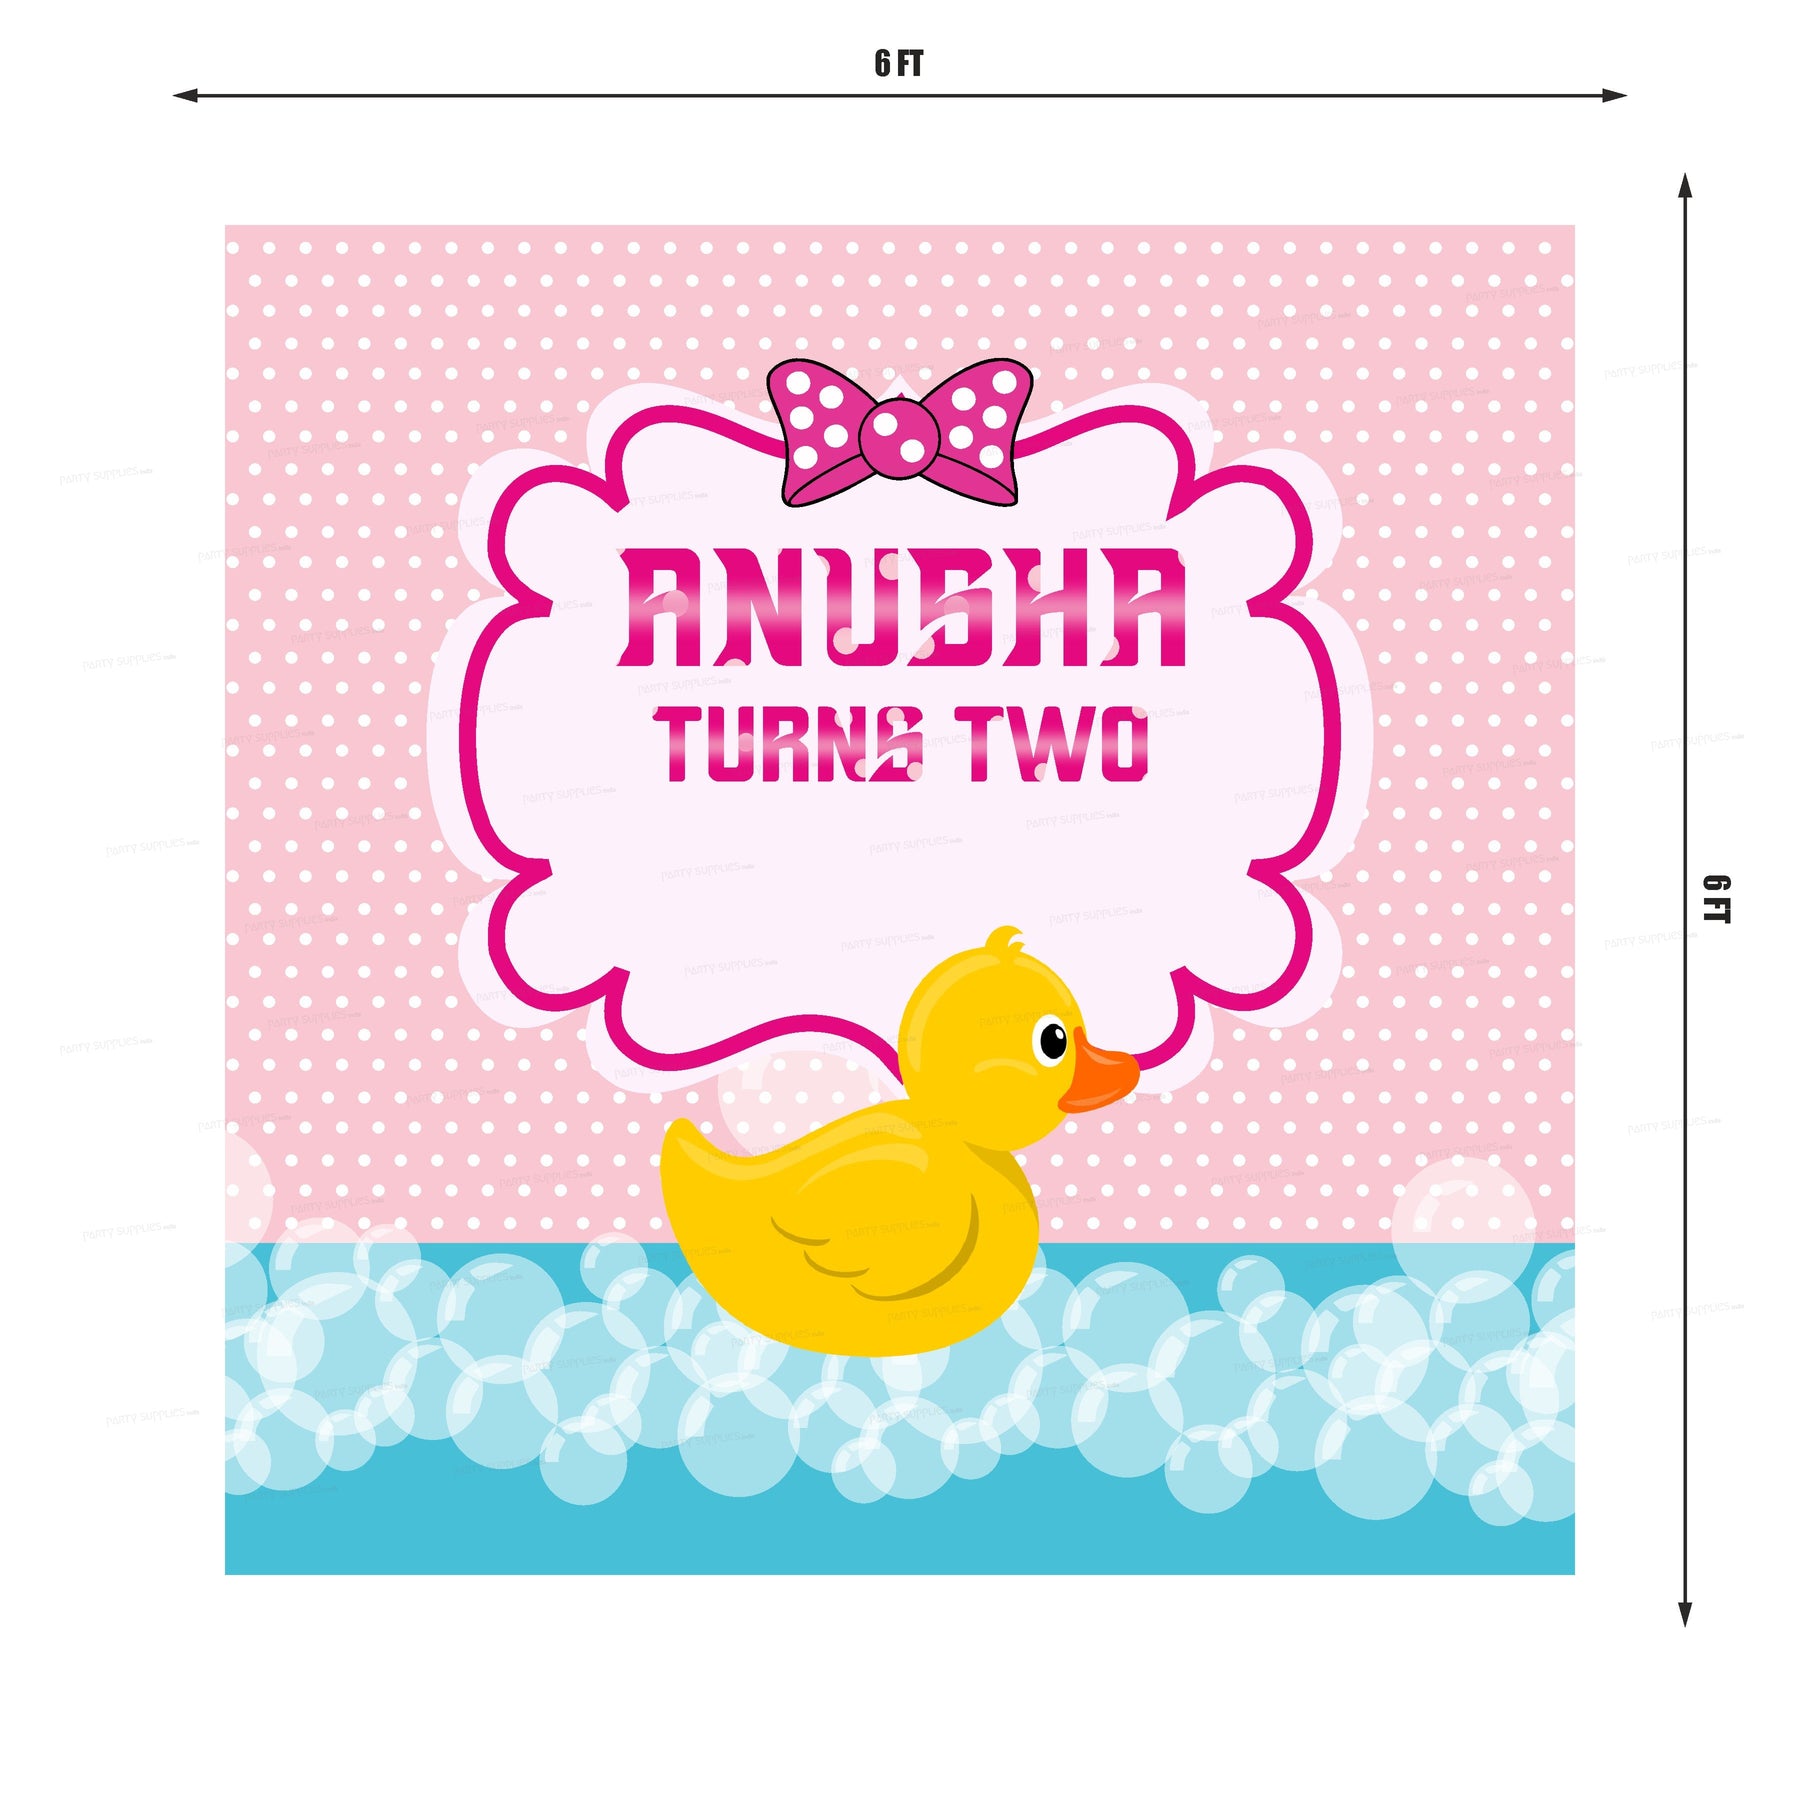 PSI Duck Theme Girl Personalized Square Backdrop